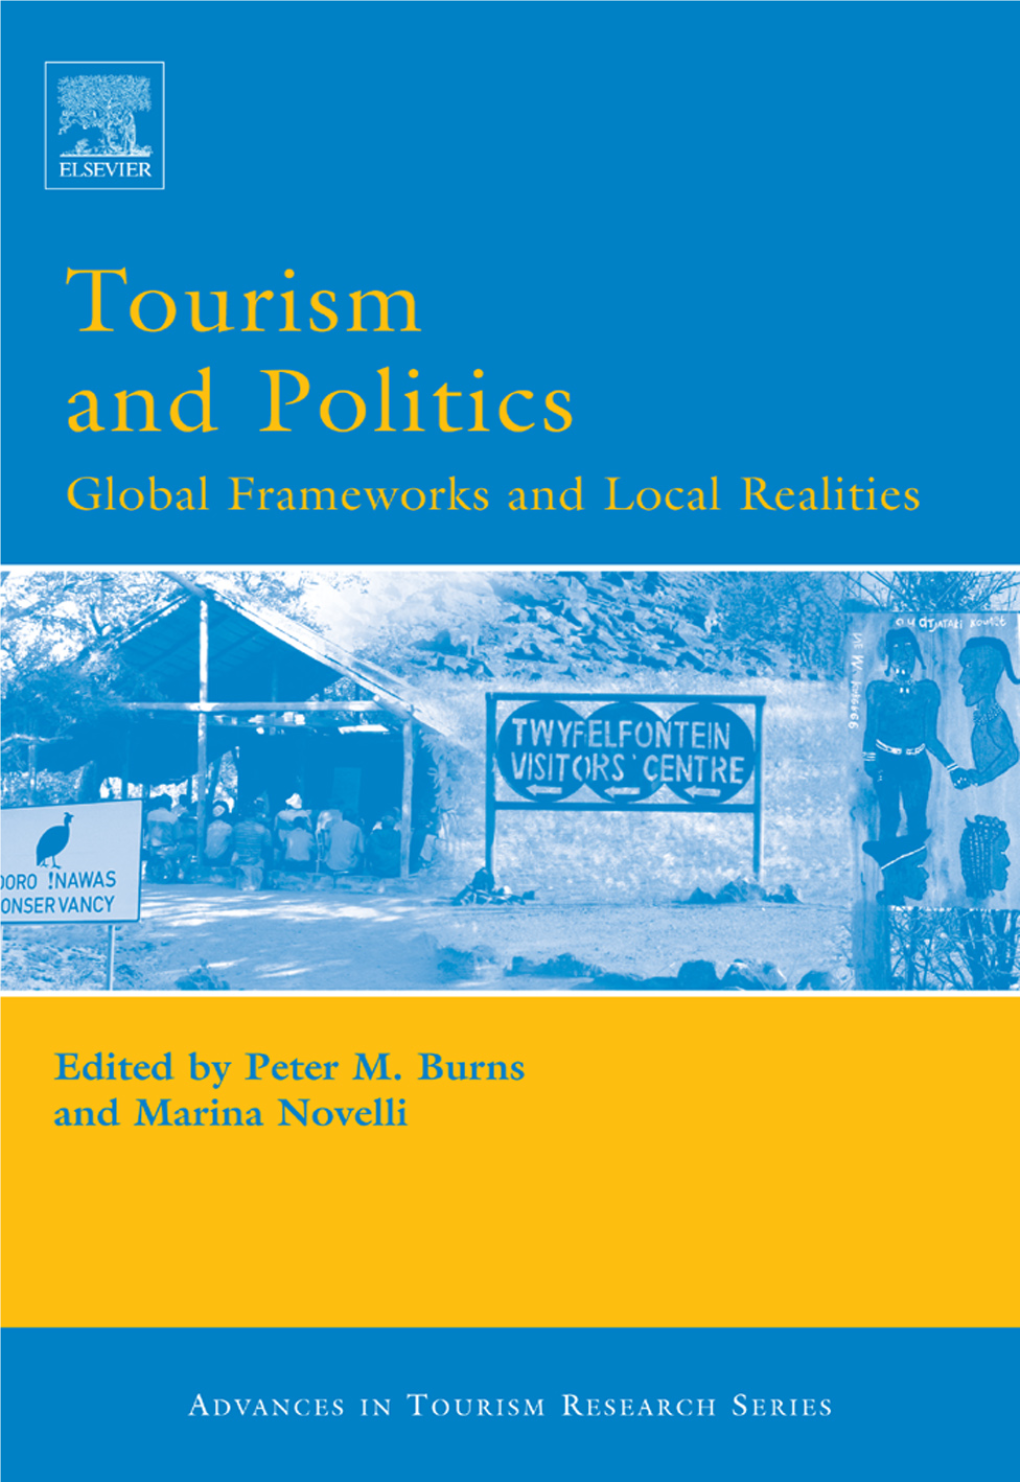 The Politics of Tourism: Ethnic Chinese Spaces in Malaysia 193 K